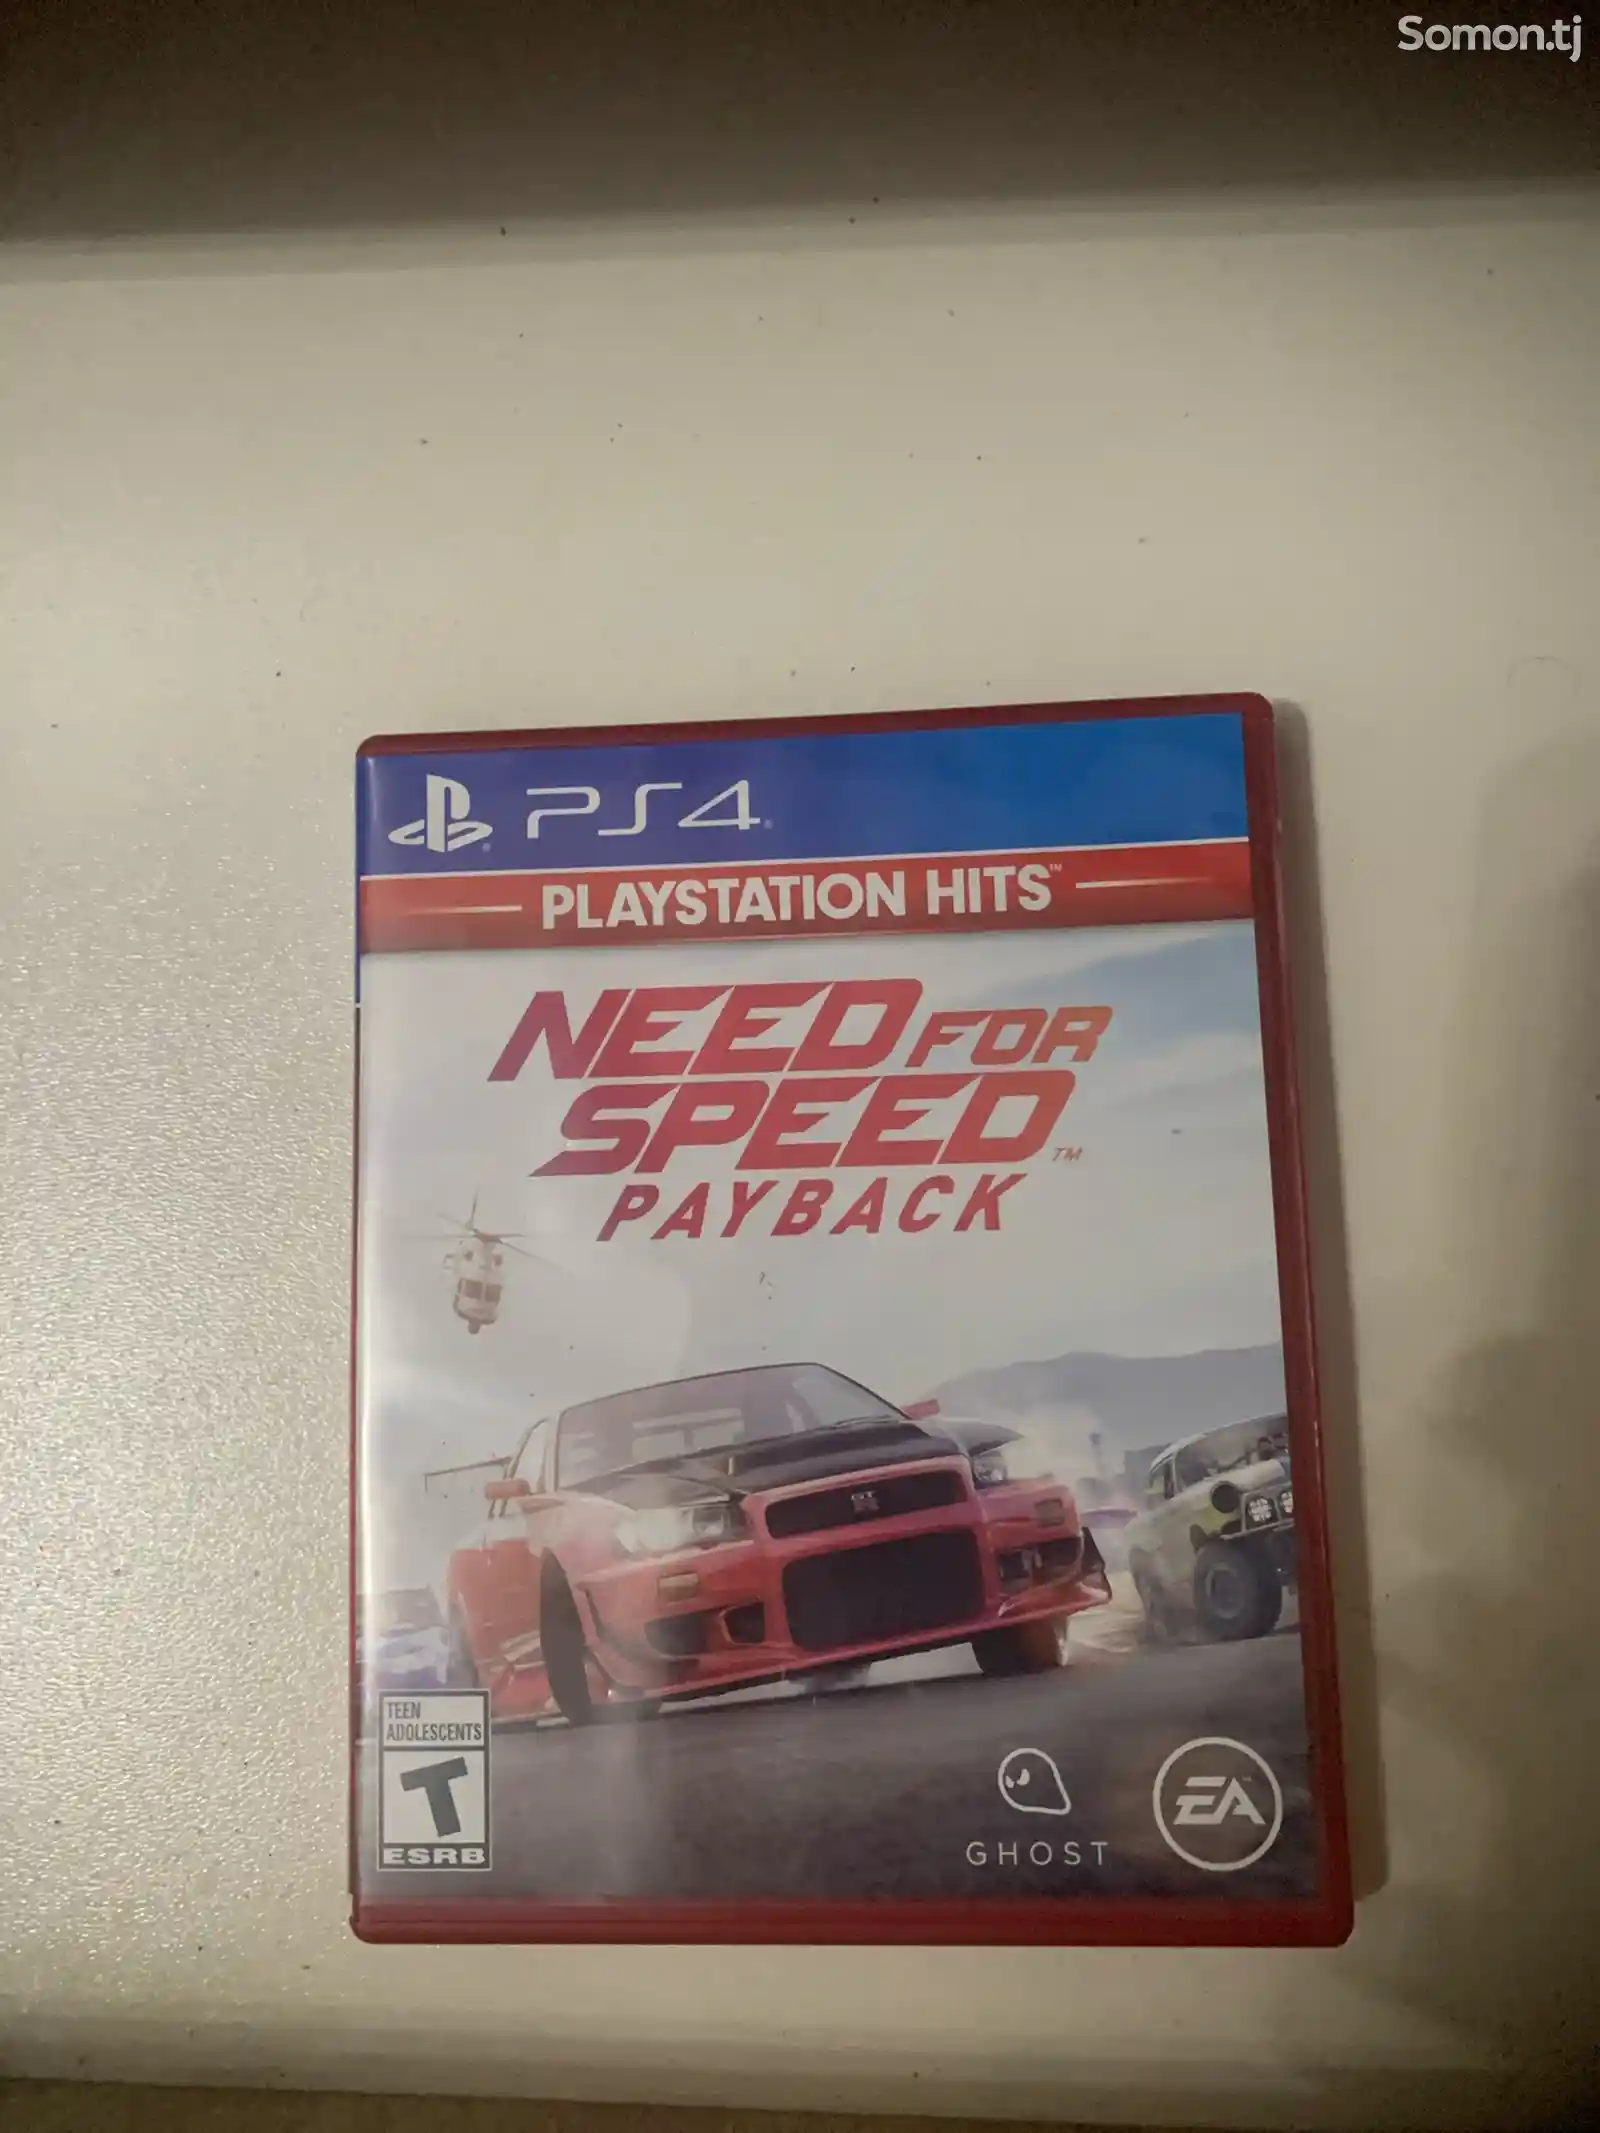 Диск PS4 Need for Speed Payback-1